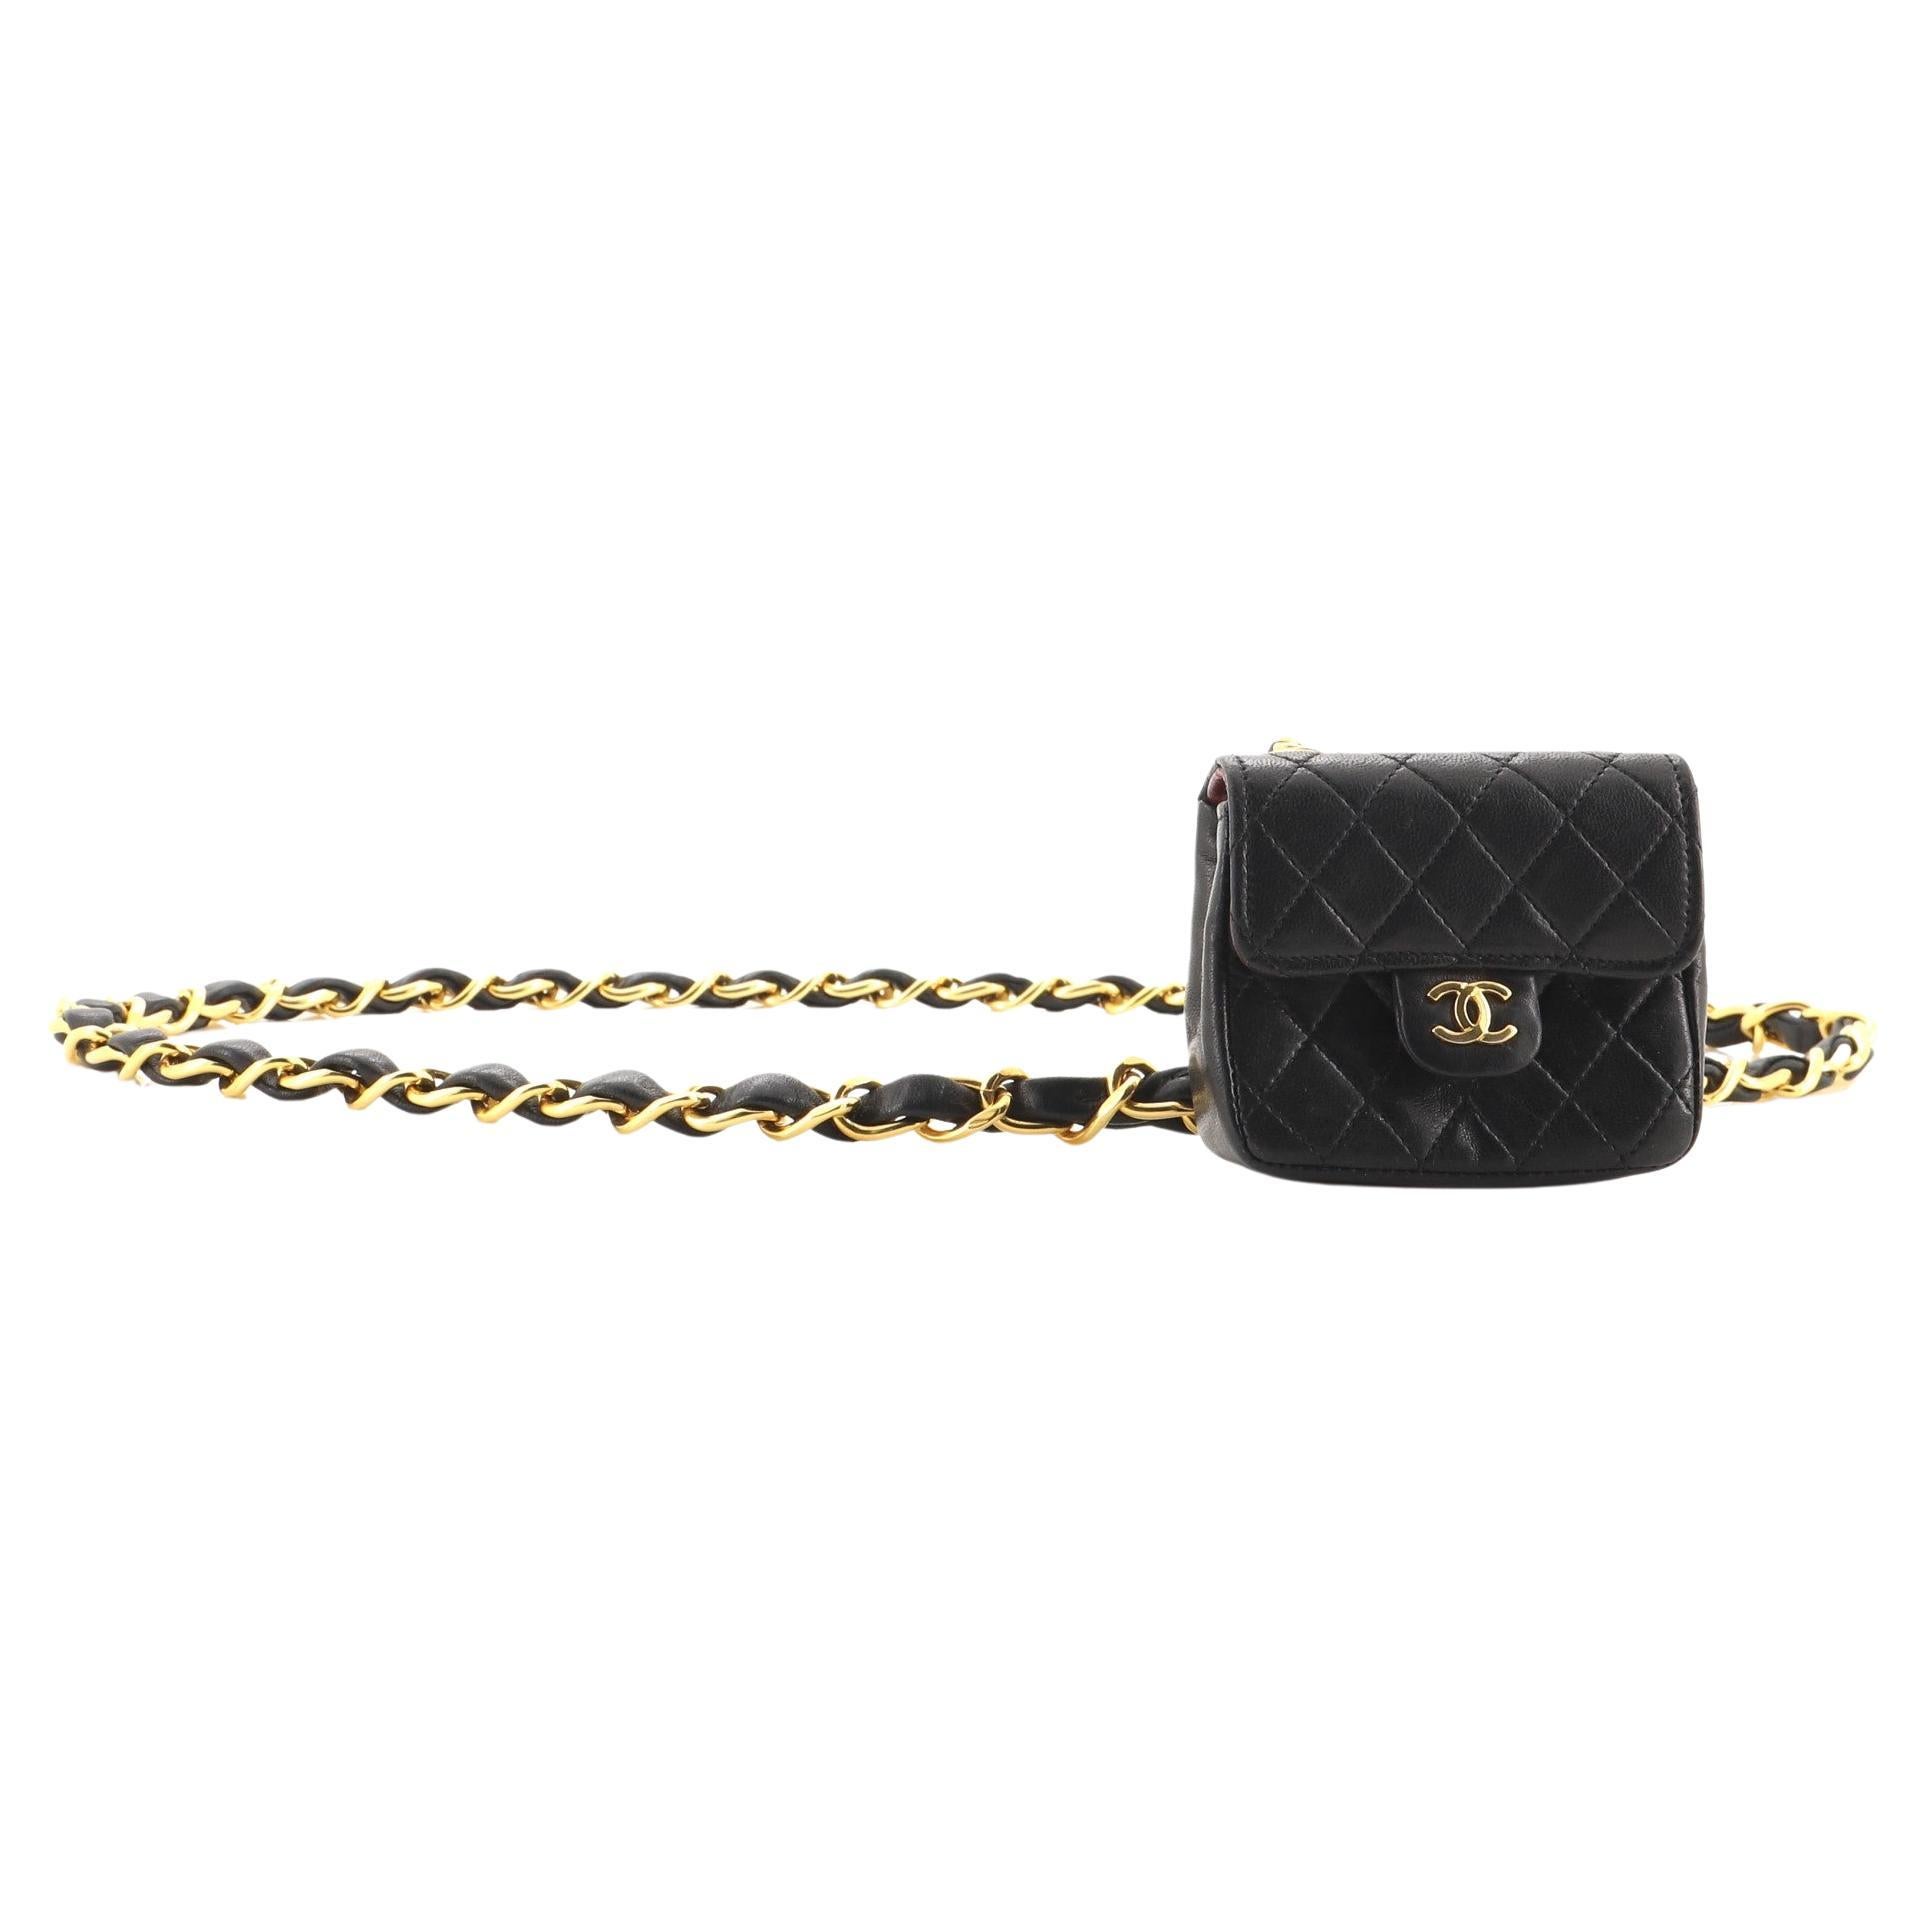 Chanel Vintage Brown Lambskin Quilted Micro Mini Flap Belt Bag Charm